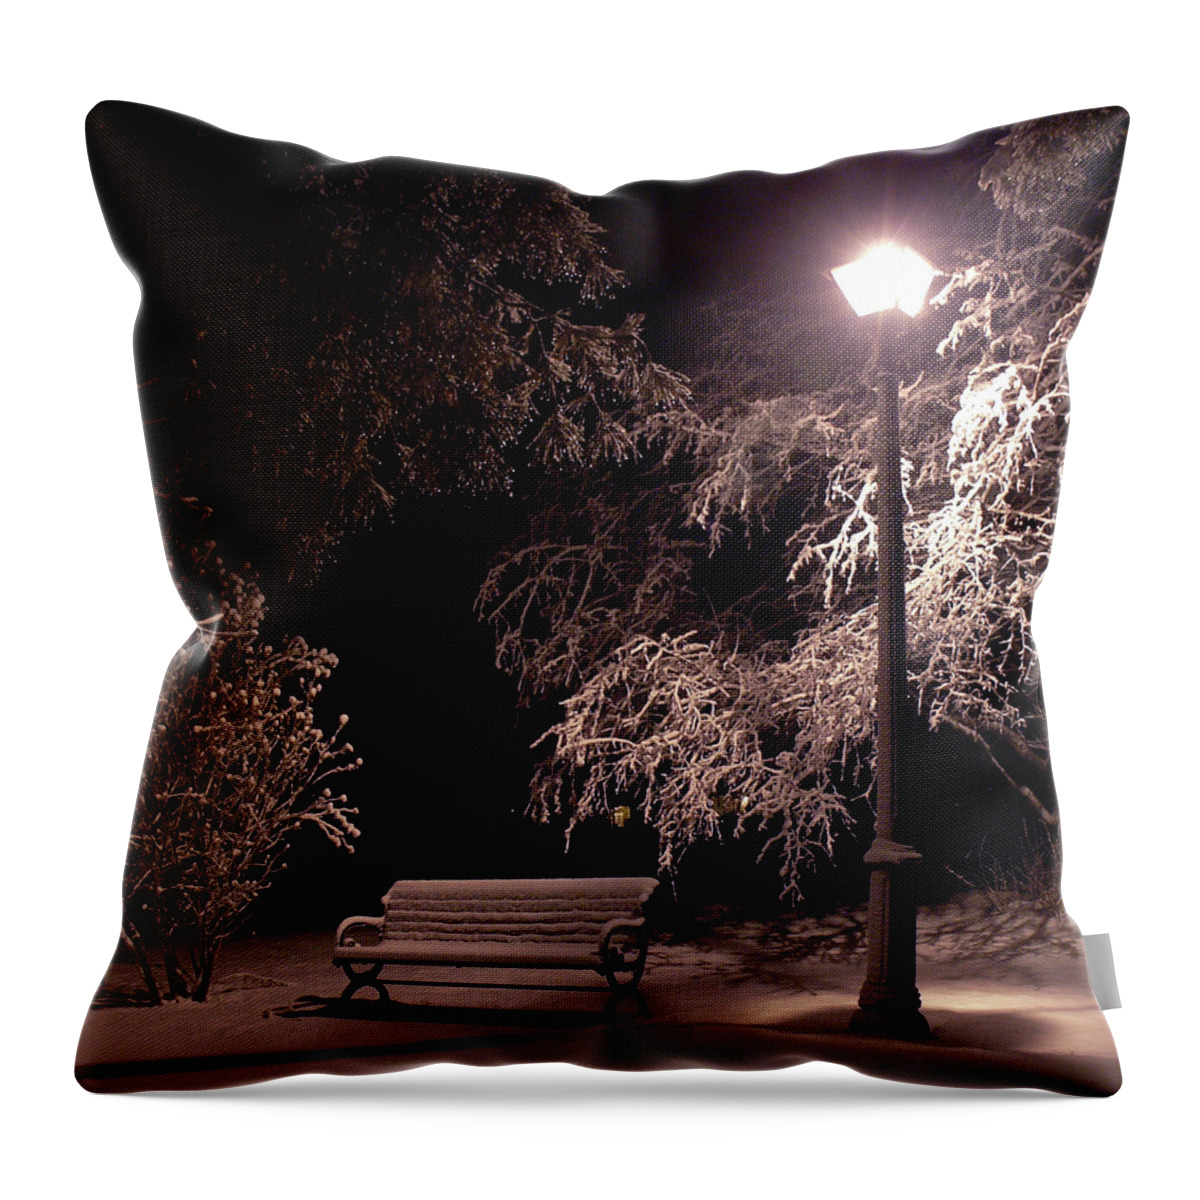  Throw Pillow featuring the photograph Silent Night by Kenneth Lane Smith